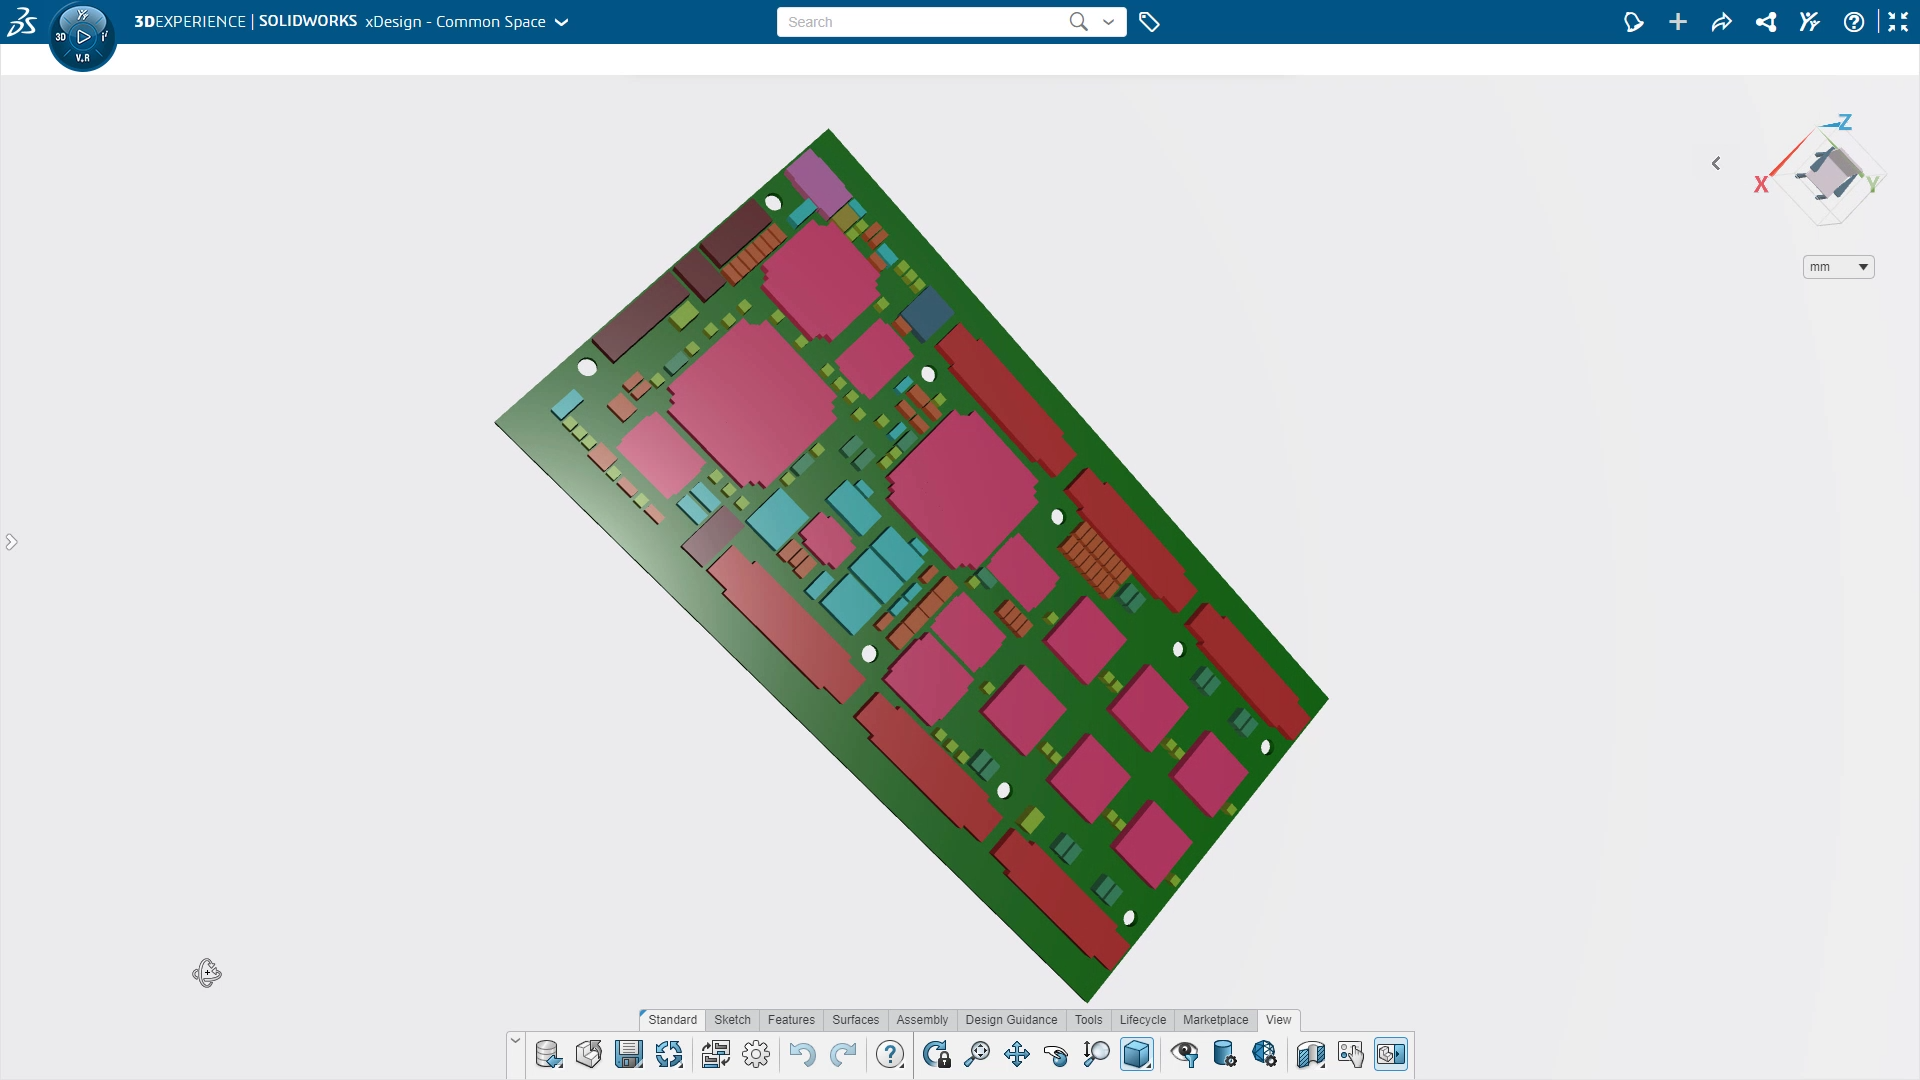 What’s New 3DEXPERIENCE Works Design 2022: February Update